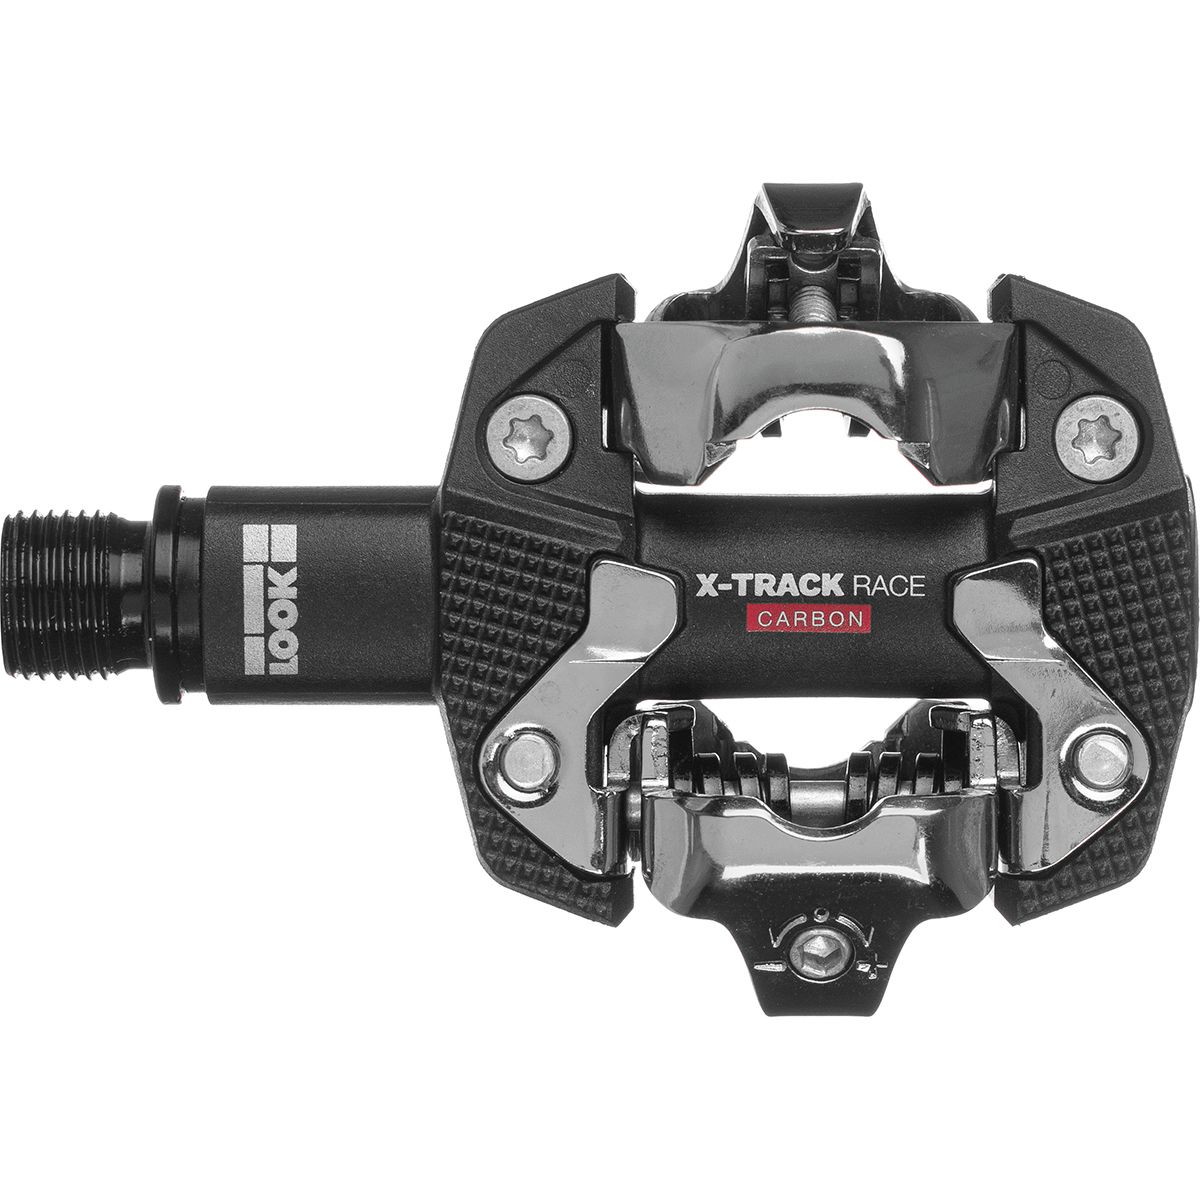 Look Cycle X-Track Race Carbon Pedals Black, One Size